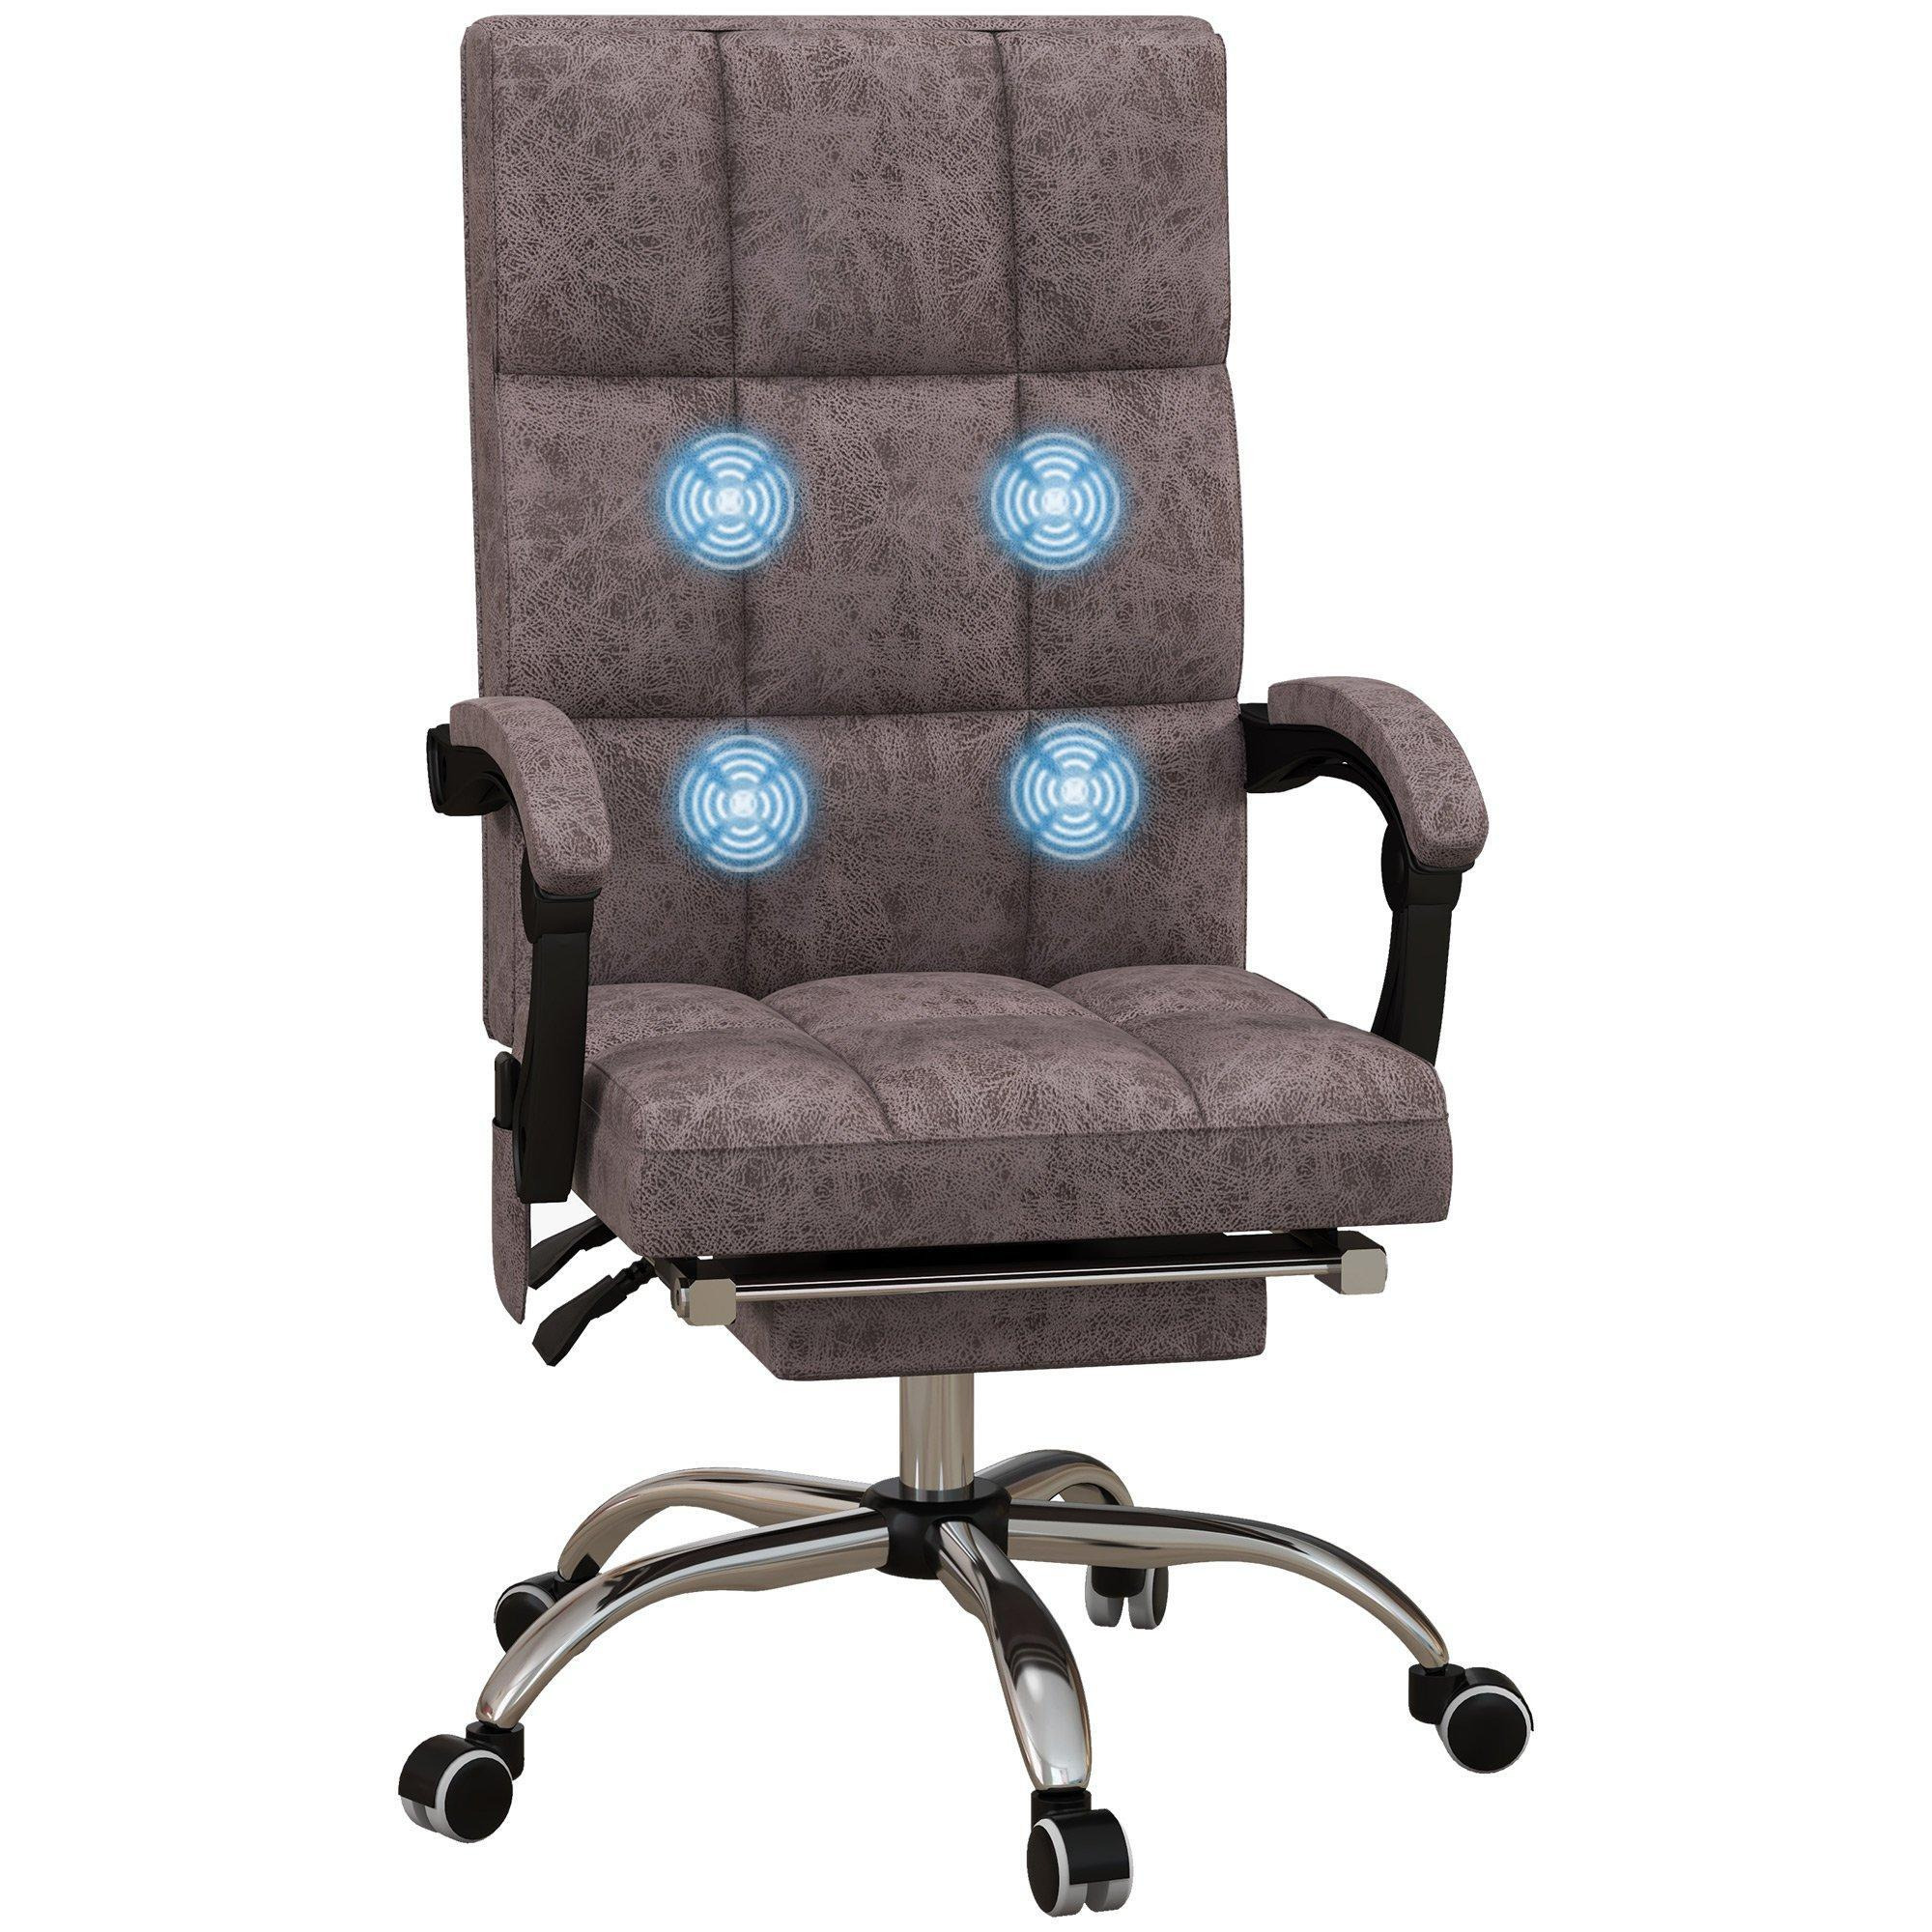 Executive Reclining Office Chair with Vibration Massage Microfibre - image 1